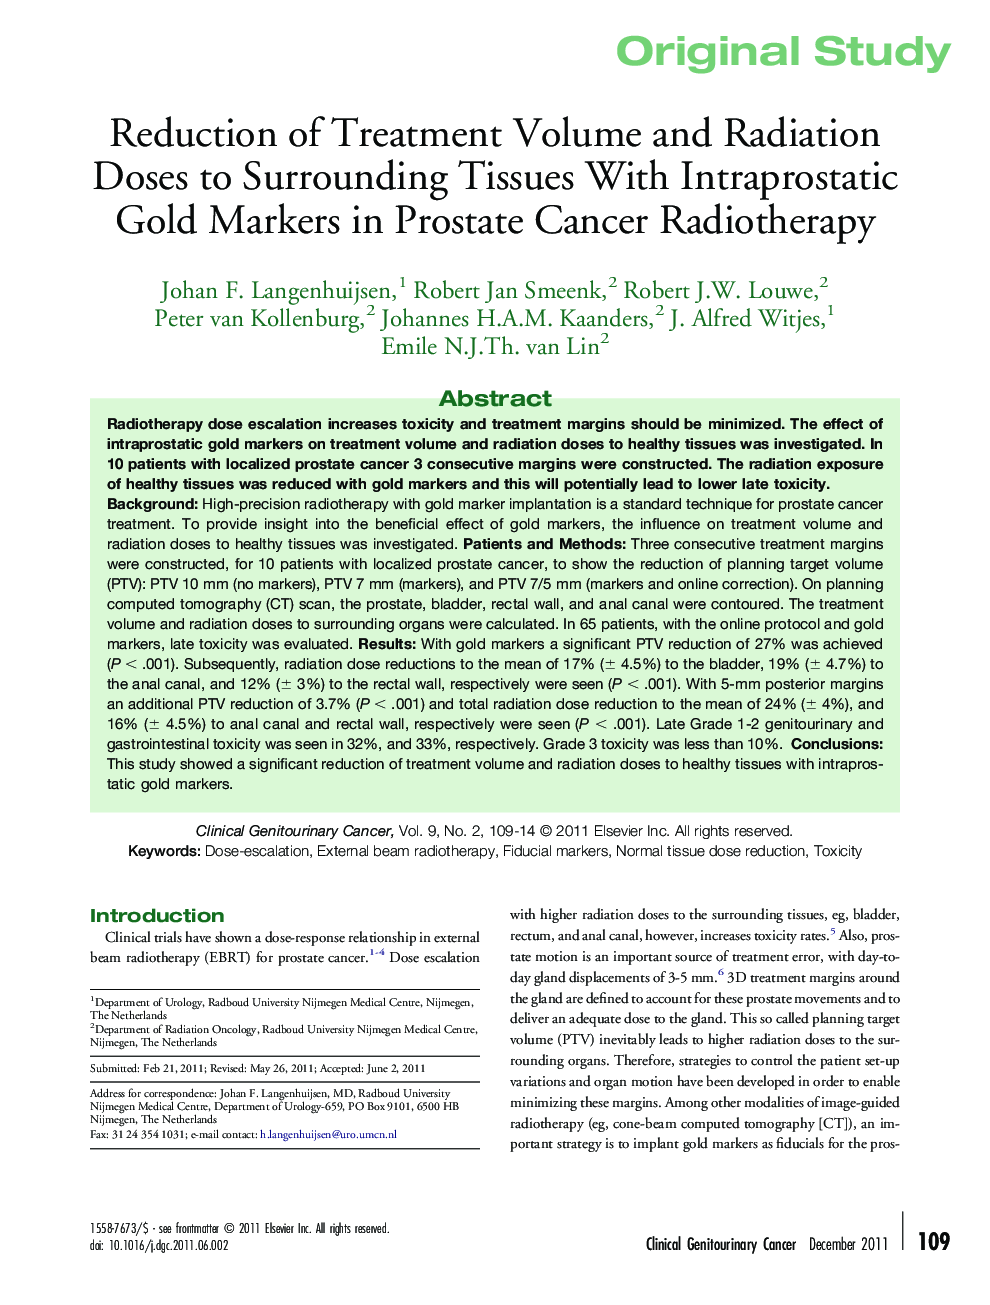 Reduction of Treatment Volume and Radiation Doses to Surrounding Tissues With Intraprostatic Gold Markers in Prostate Cancer Radiotherapy